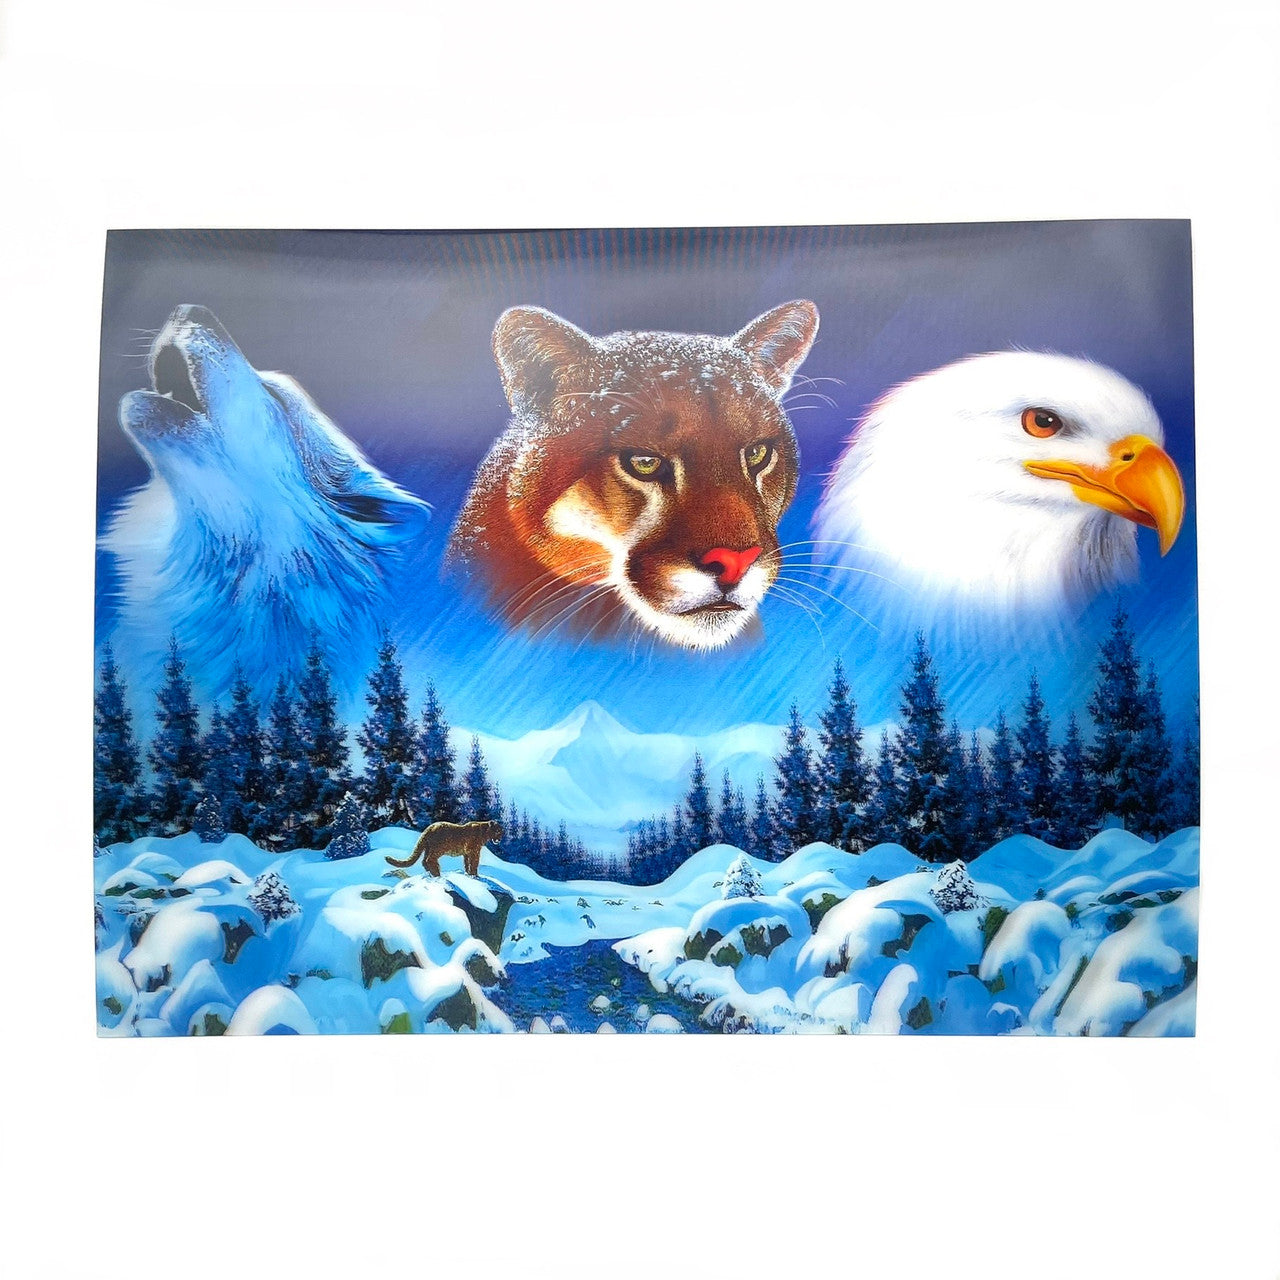 A howling wolf head, a bobcat head, and an eagle head all appear in the sky above a snowy landscape.